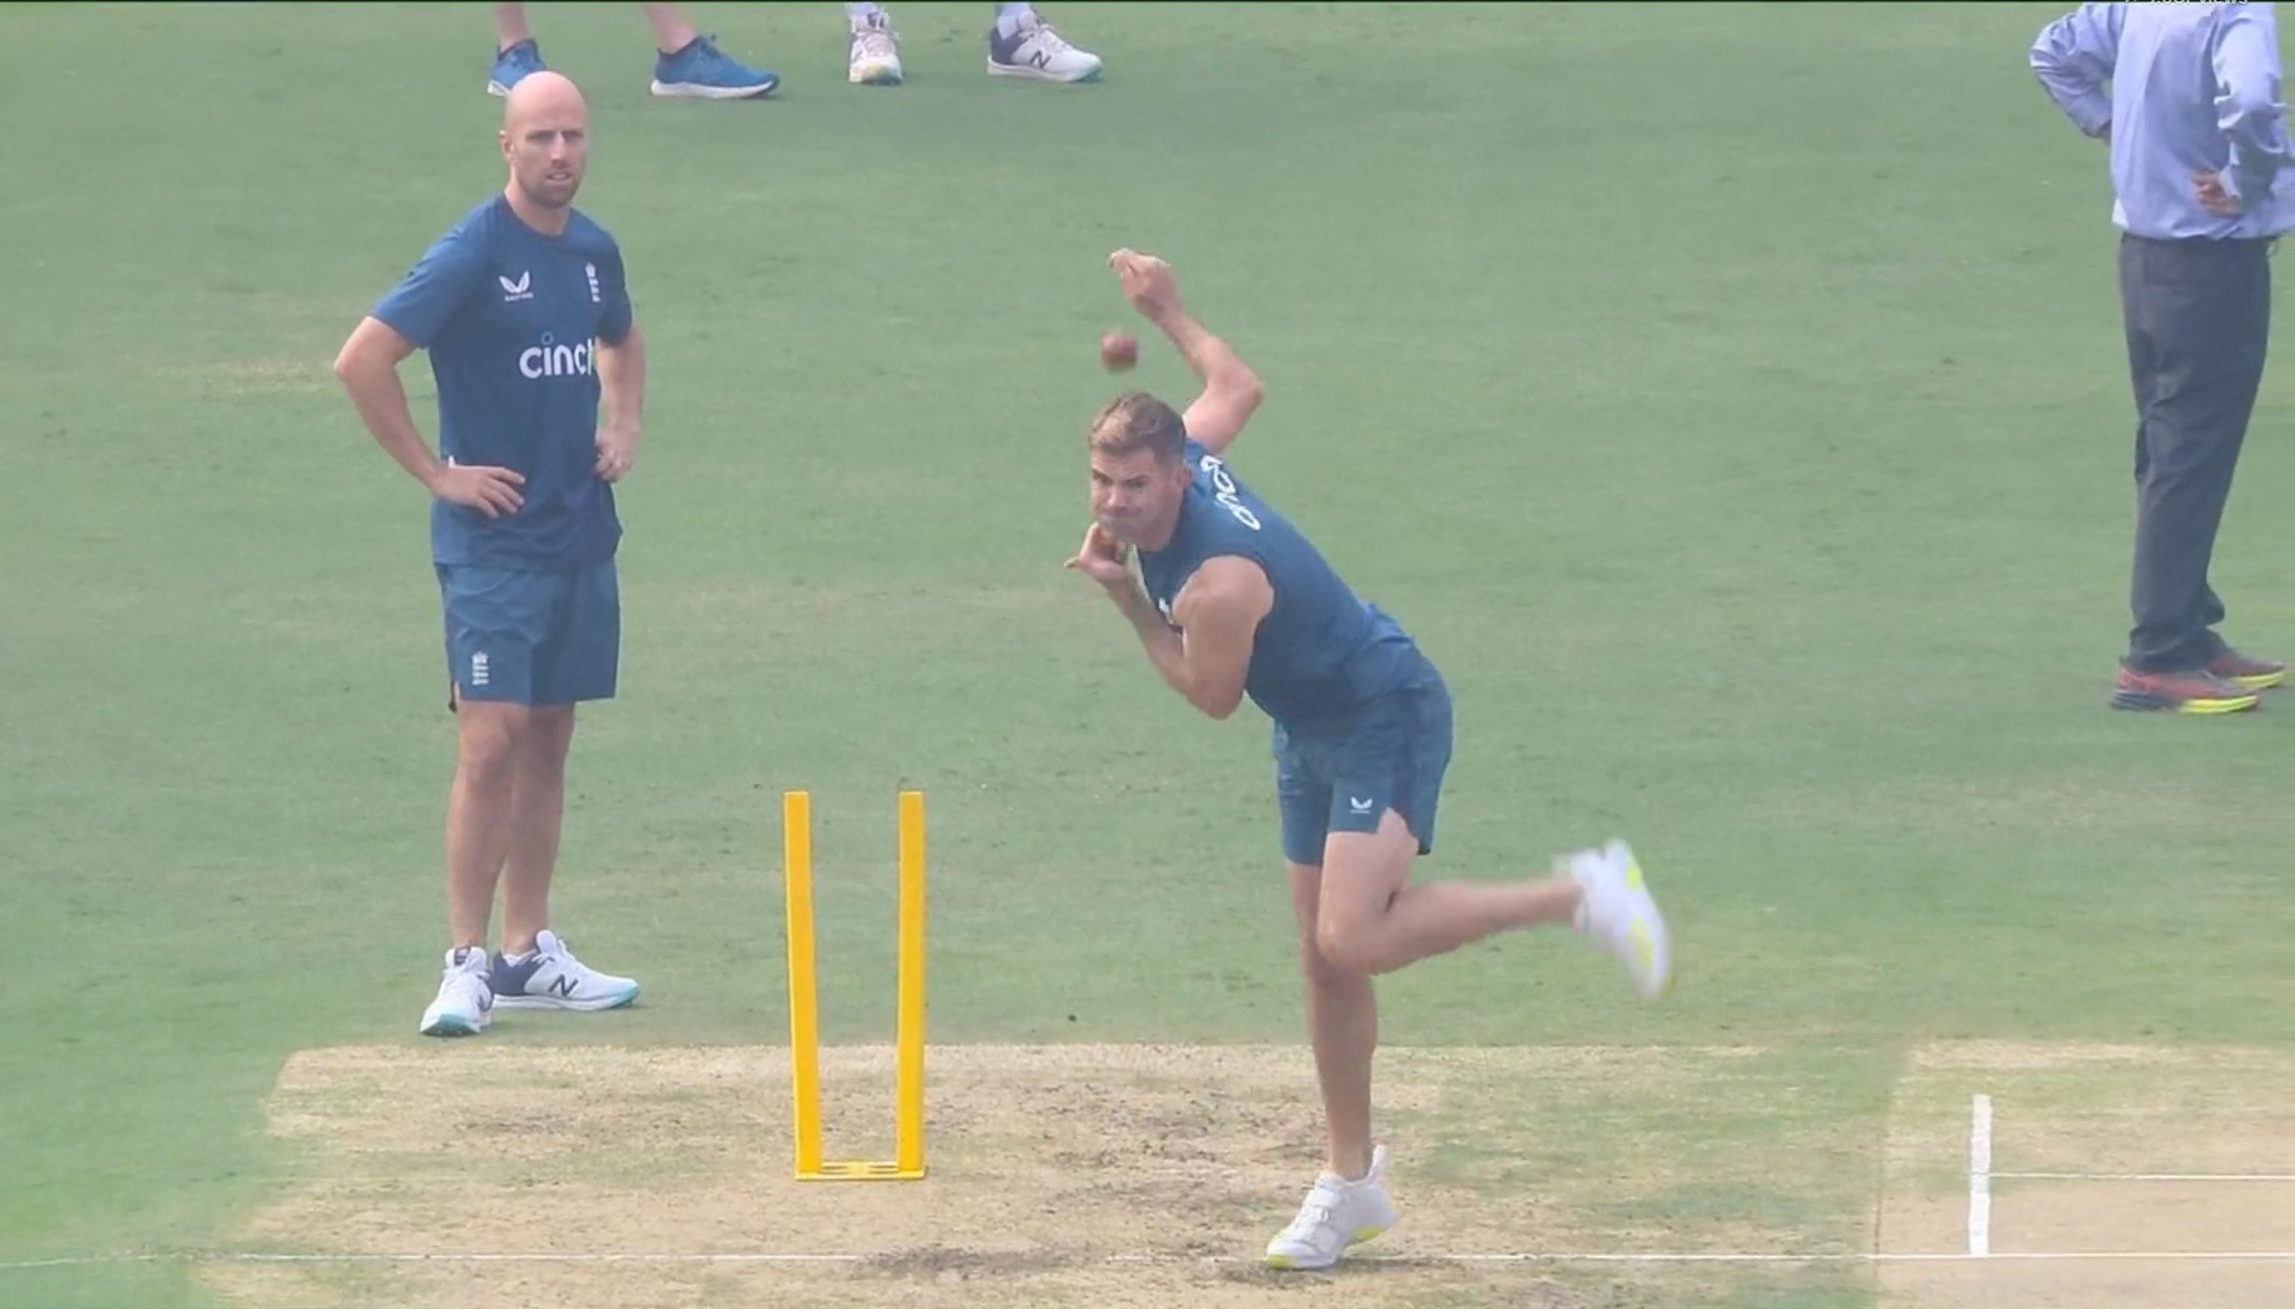 [WATCH] James Anderson Bowls Left-Arm Spin During Practice Session